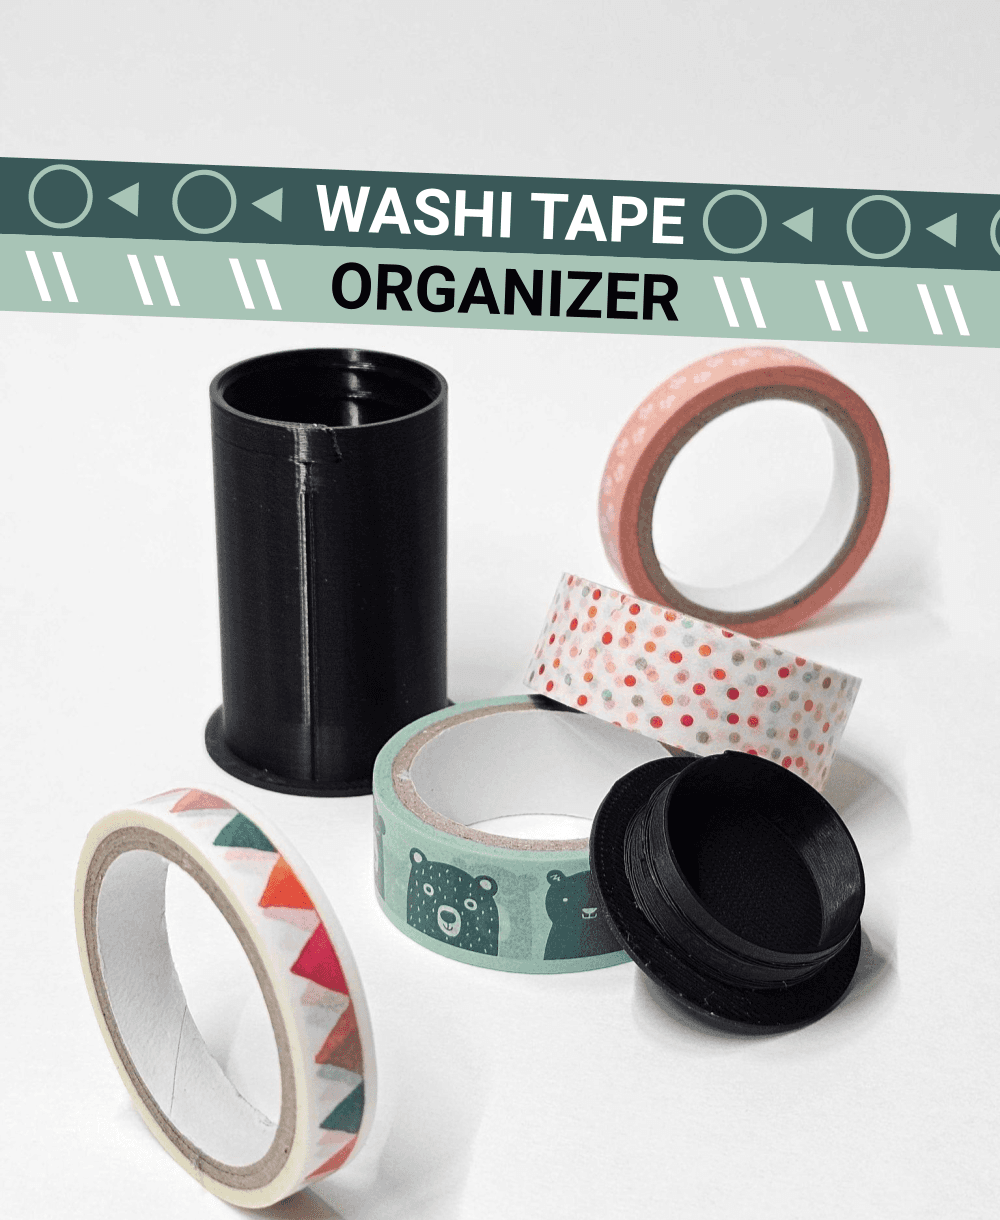 Washi tape holder | Stash supplies inside with screw-on lid! | Fits 3 rolls of 16mm width craft tape 3d model